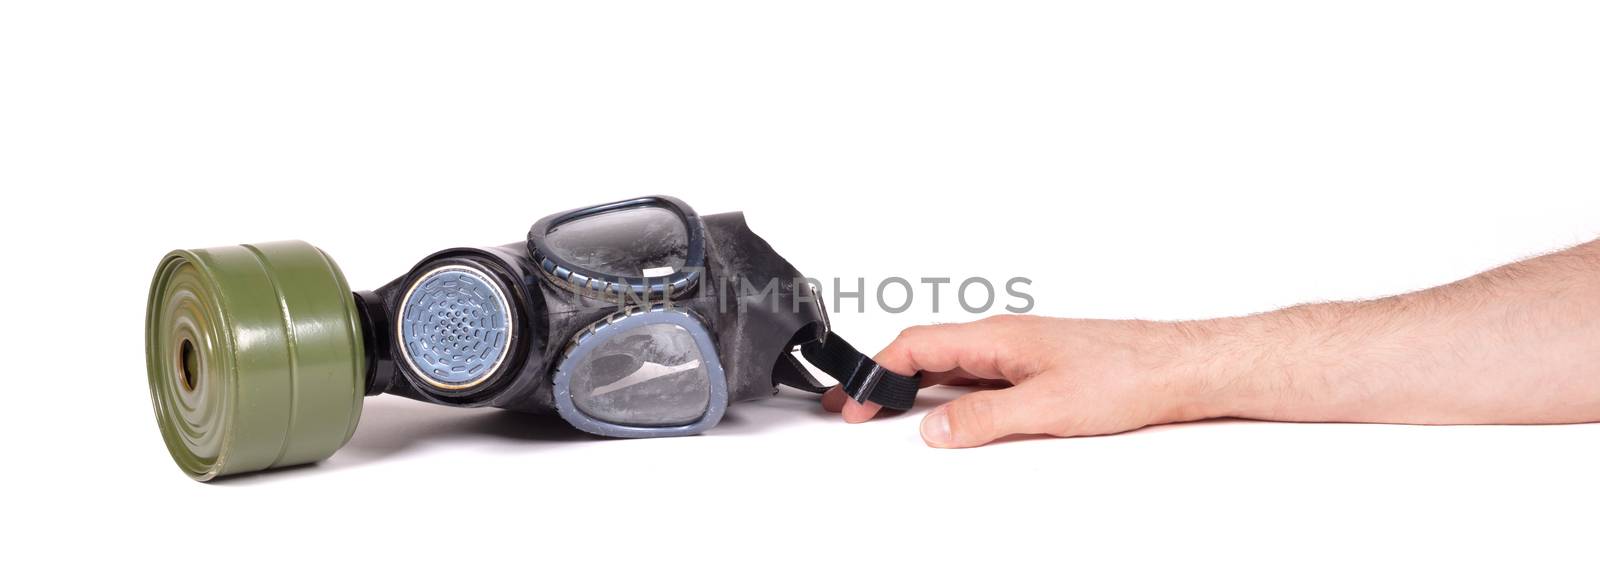 Arm reaching for vintage gasmask isolated on white - Green filte by michaklootwijk